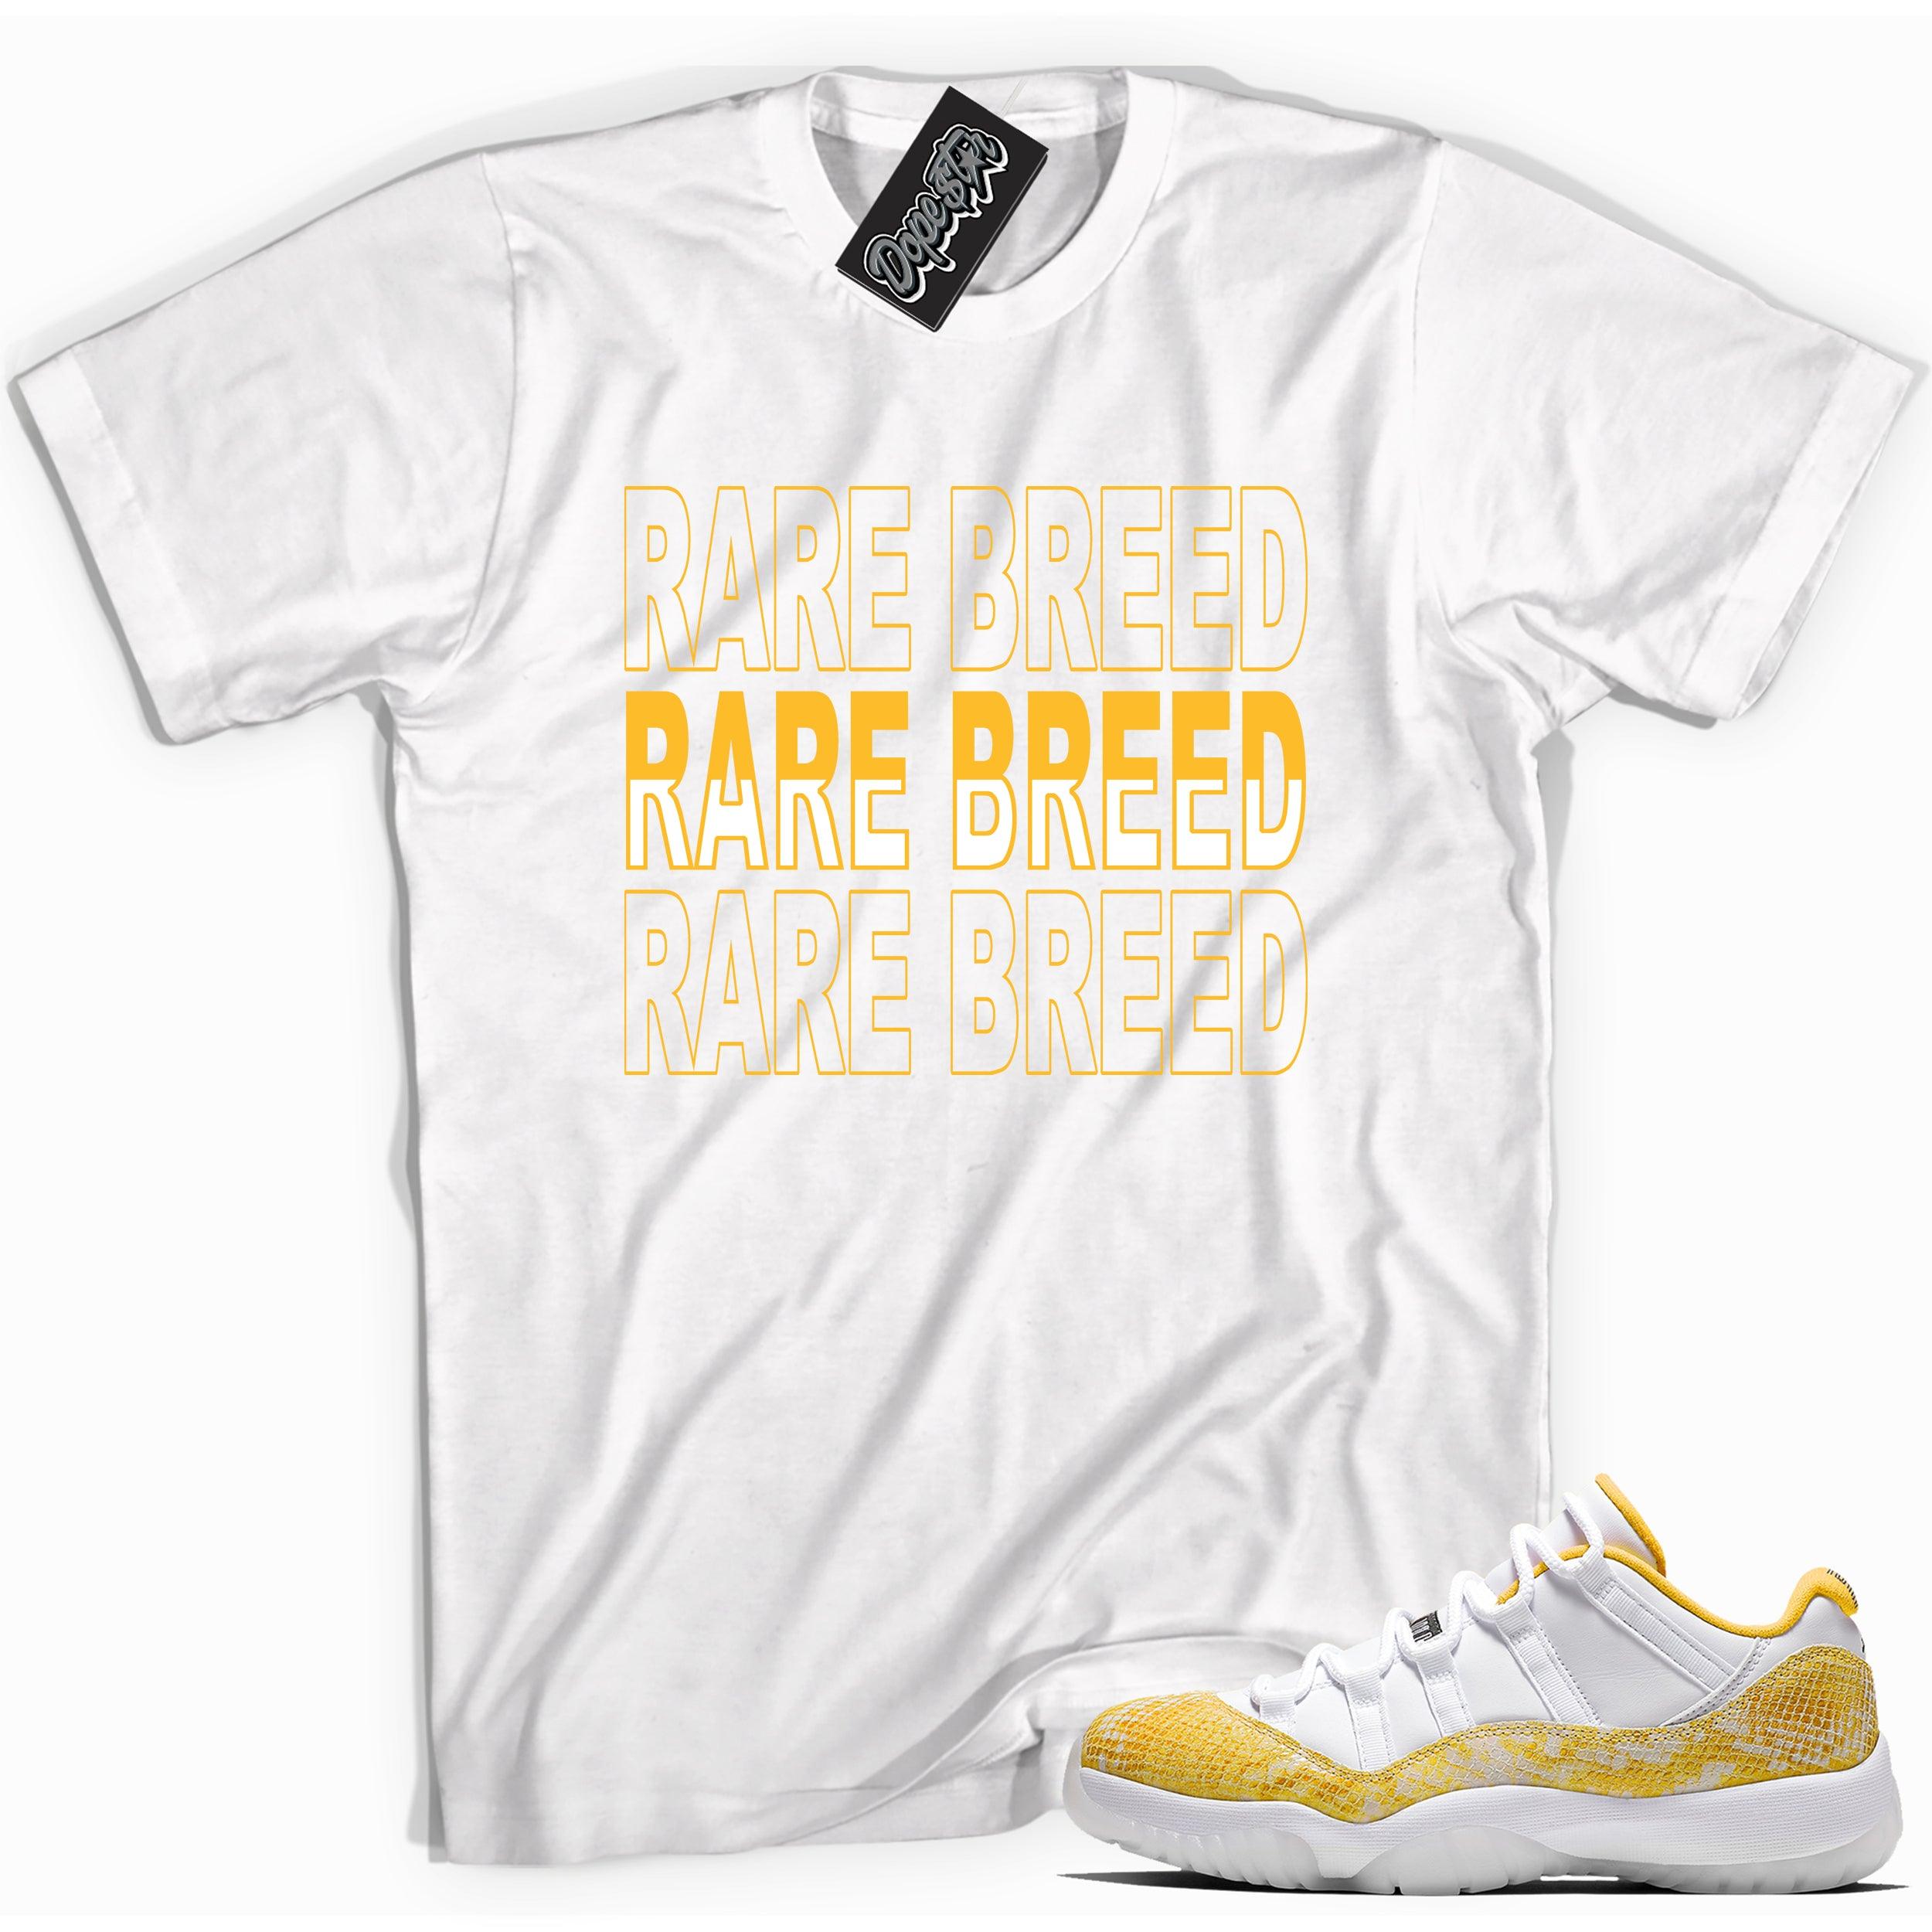 Cool white graphic tee with 'rare breed' print, that perfectly matches Air Jordan 11 Retro Low Yellow Snakeskin sneakers